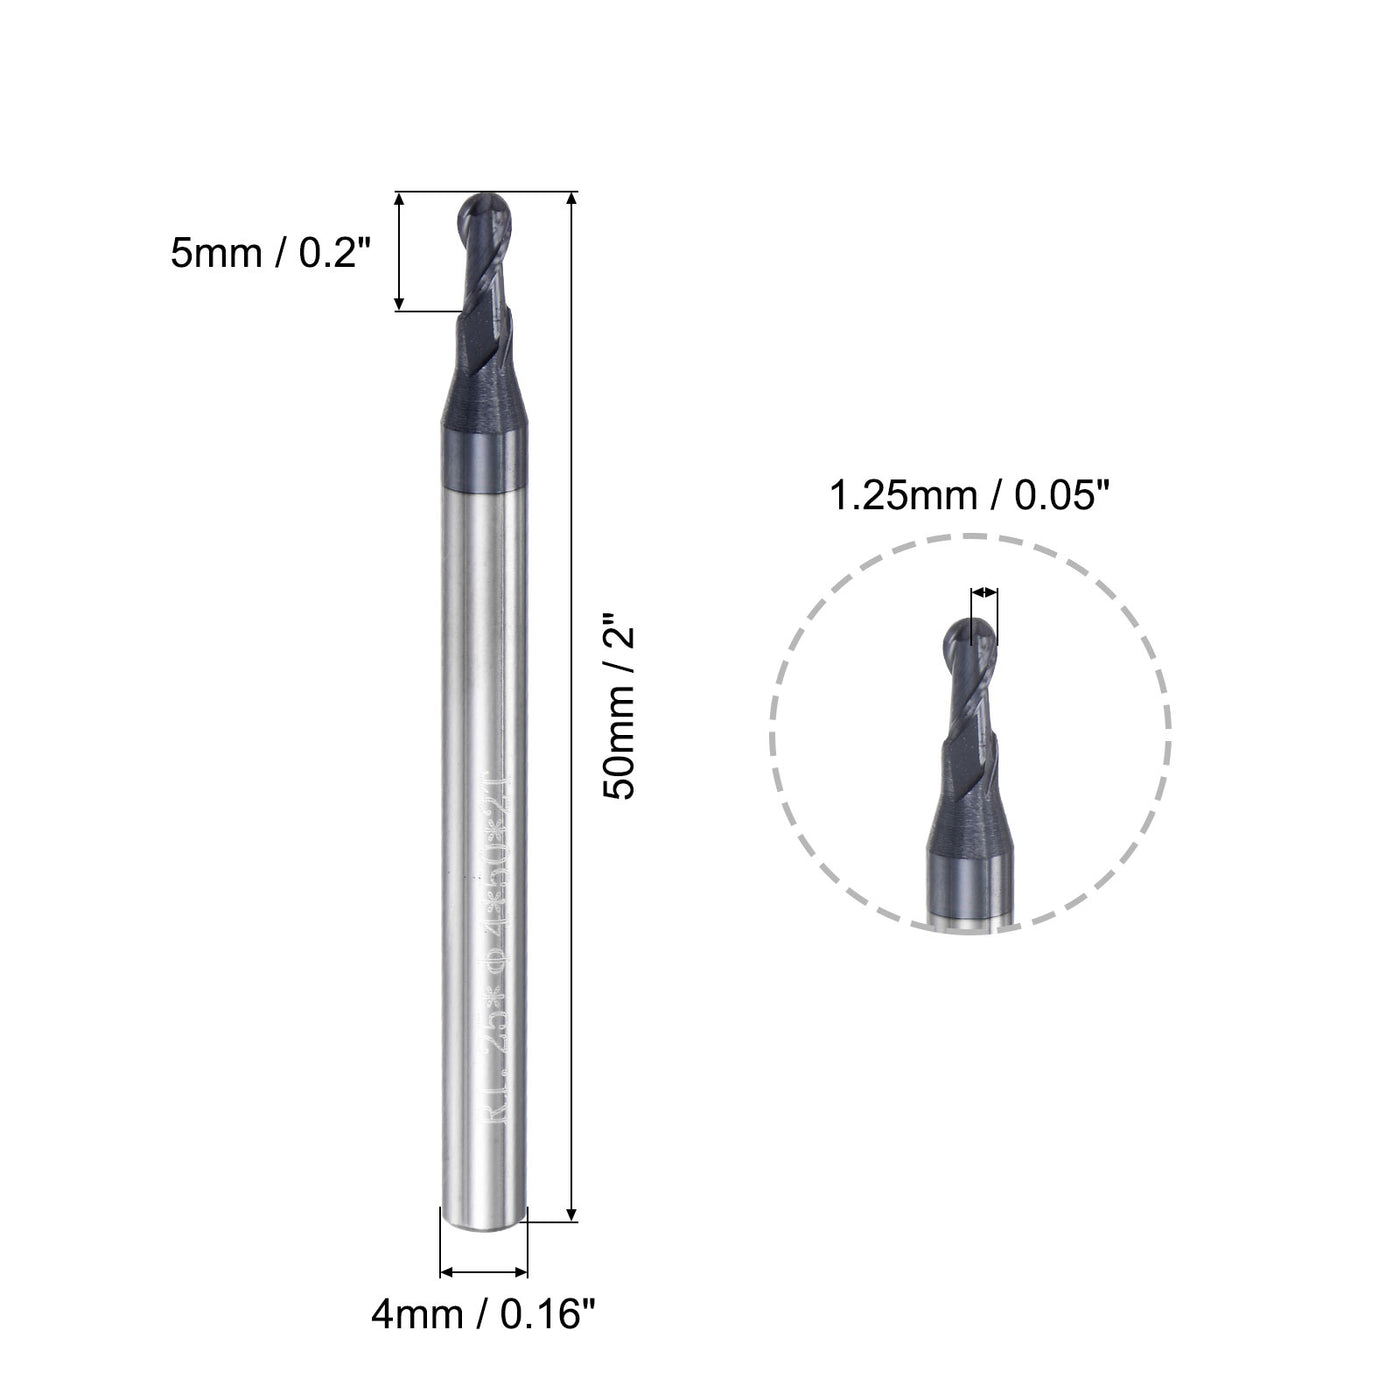 uxcell Uxcell 1.25mm Radius 50mm Long HRC45 Carbide AlTiSin Coated 2 Flute Ball Nose End Mill